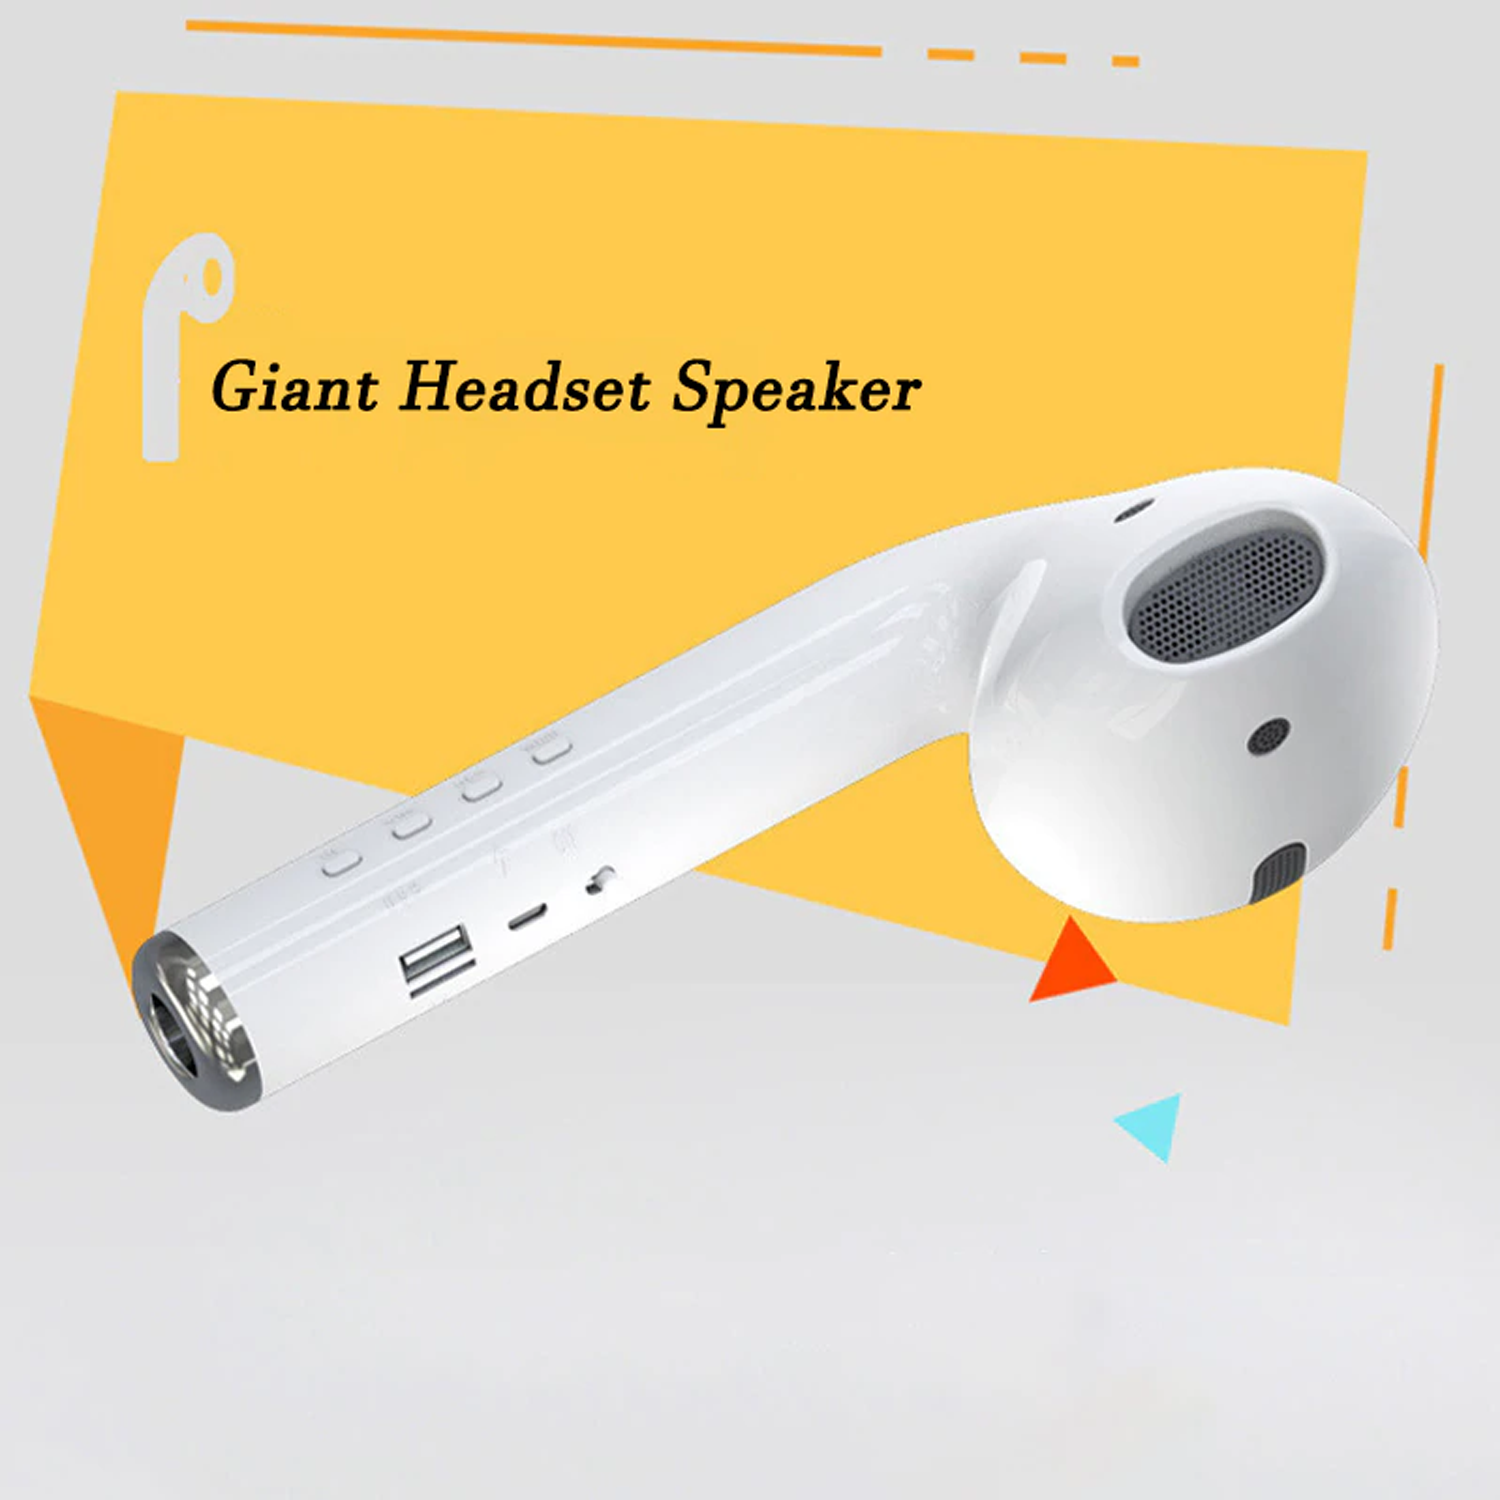 Bluetooth Speaker Giant headset Speakers | Portable Outdoor Wireless Loudspeakers airpodding 3D Stereo surround Music soundbar - image 5 of 8